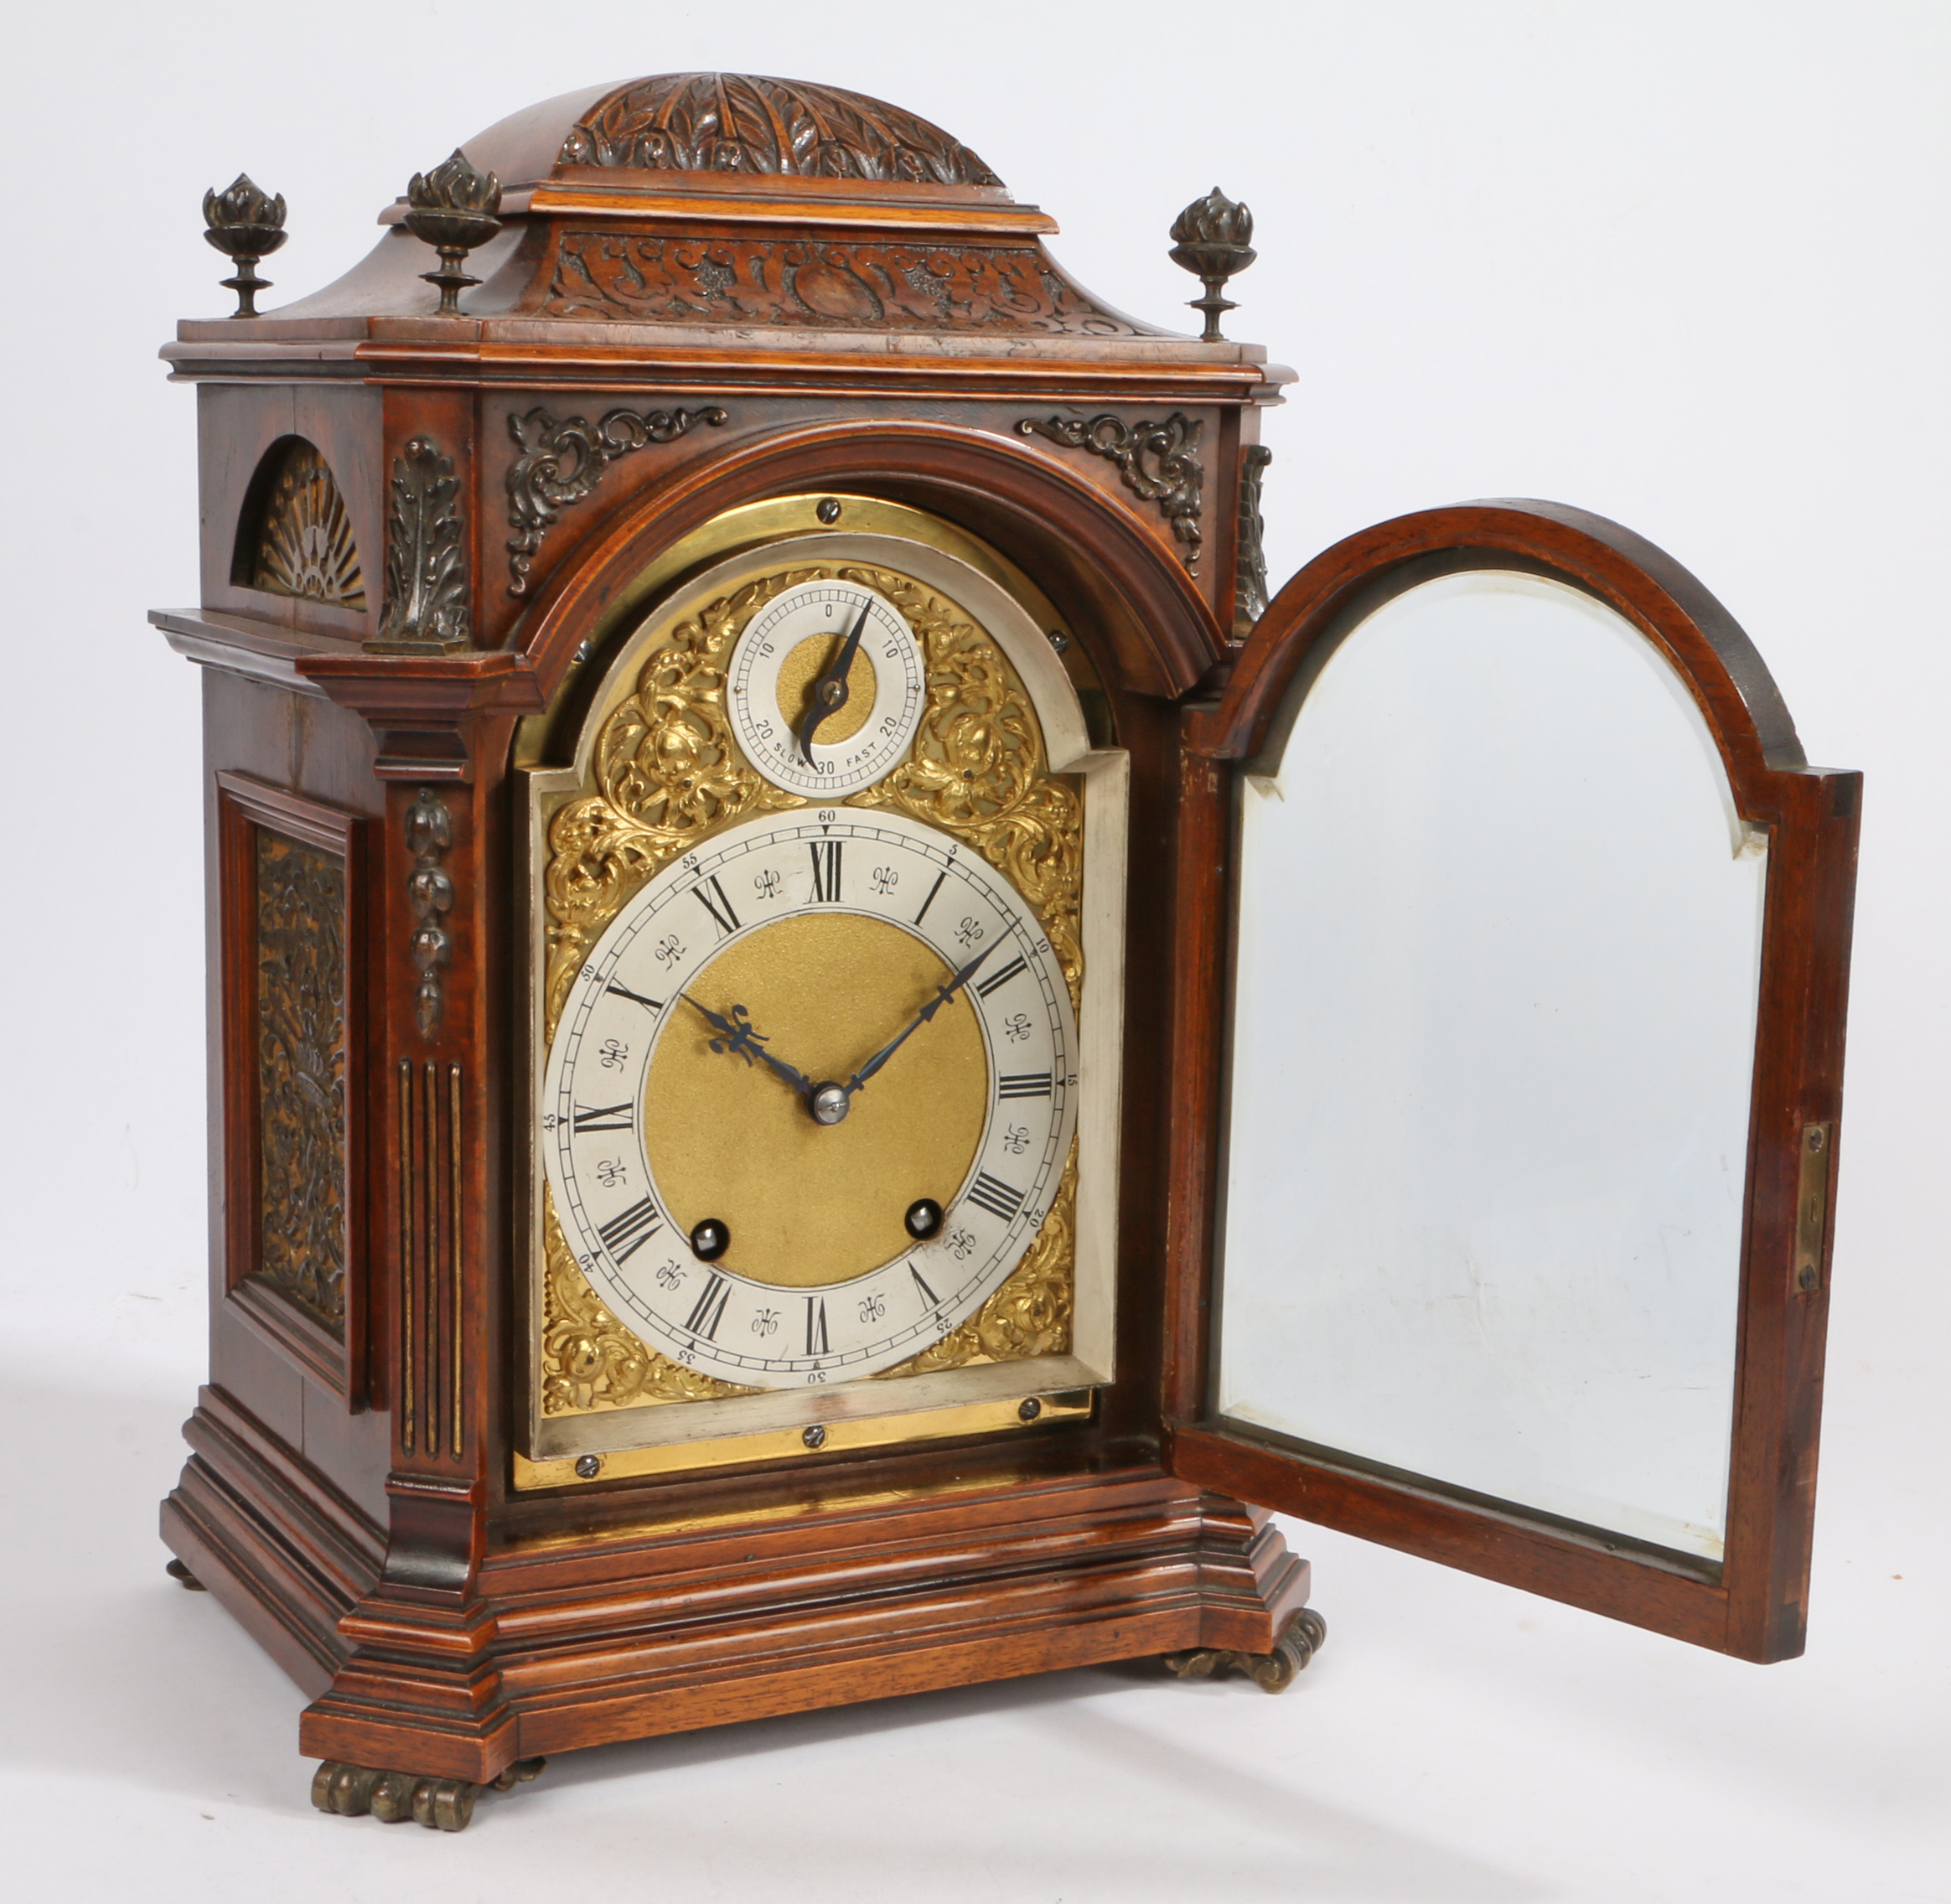 An early 20th Century walnut and brass mounted mantel clock, by Lenzkirch, No. 382379, the case with - Image 2 of 3